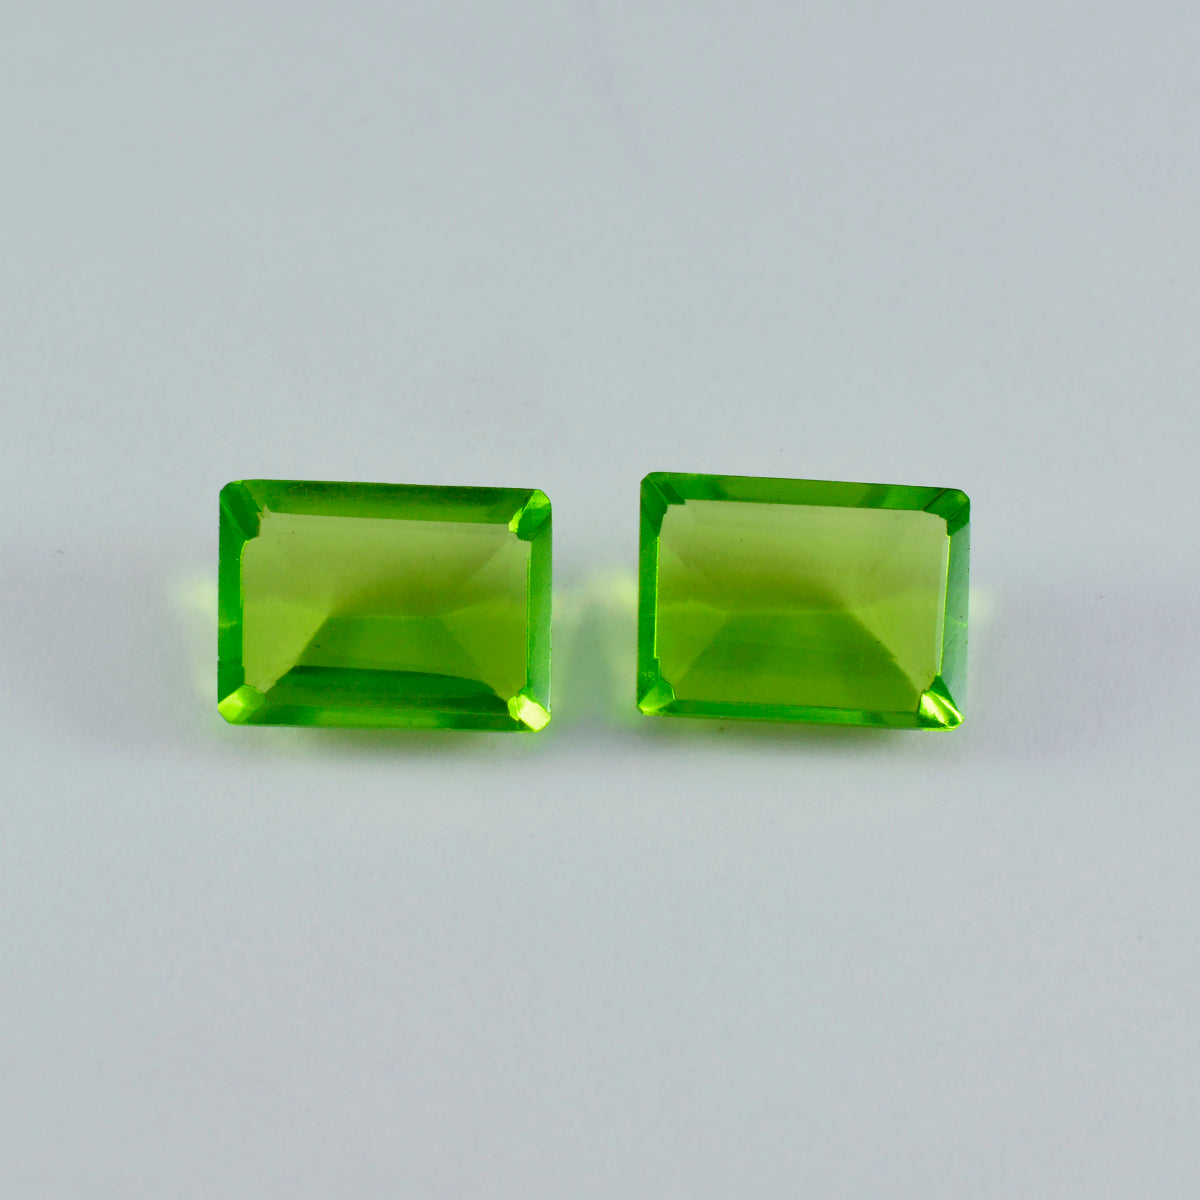 Riyogems 1PC Green Peridot CZ Faceted 10x12 mm Octagon Shape awesome Quality Loose Stone